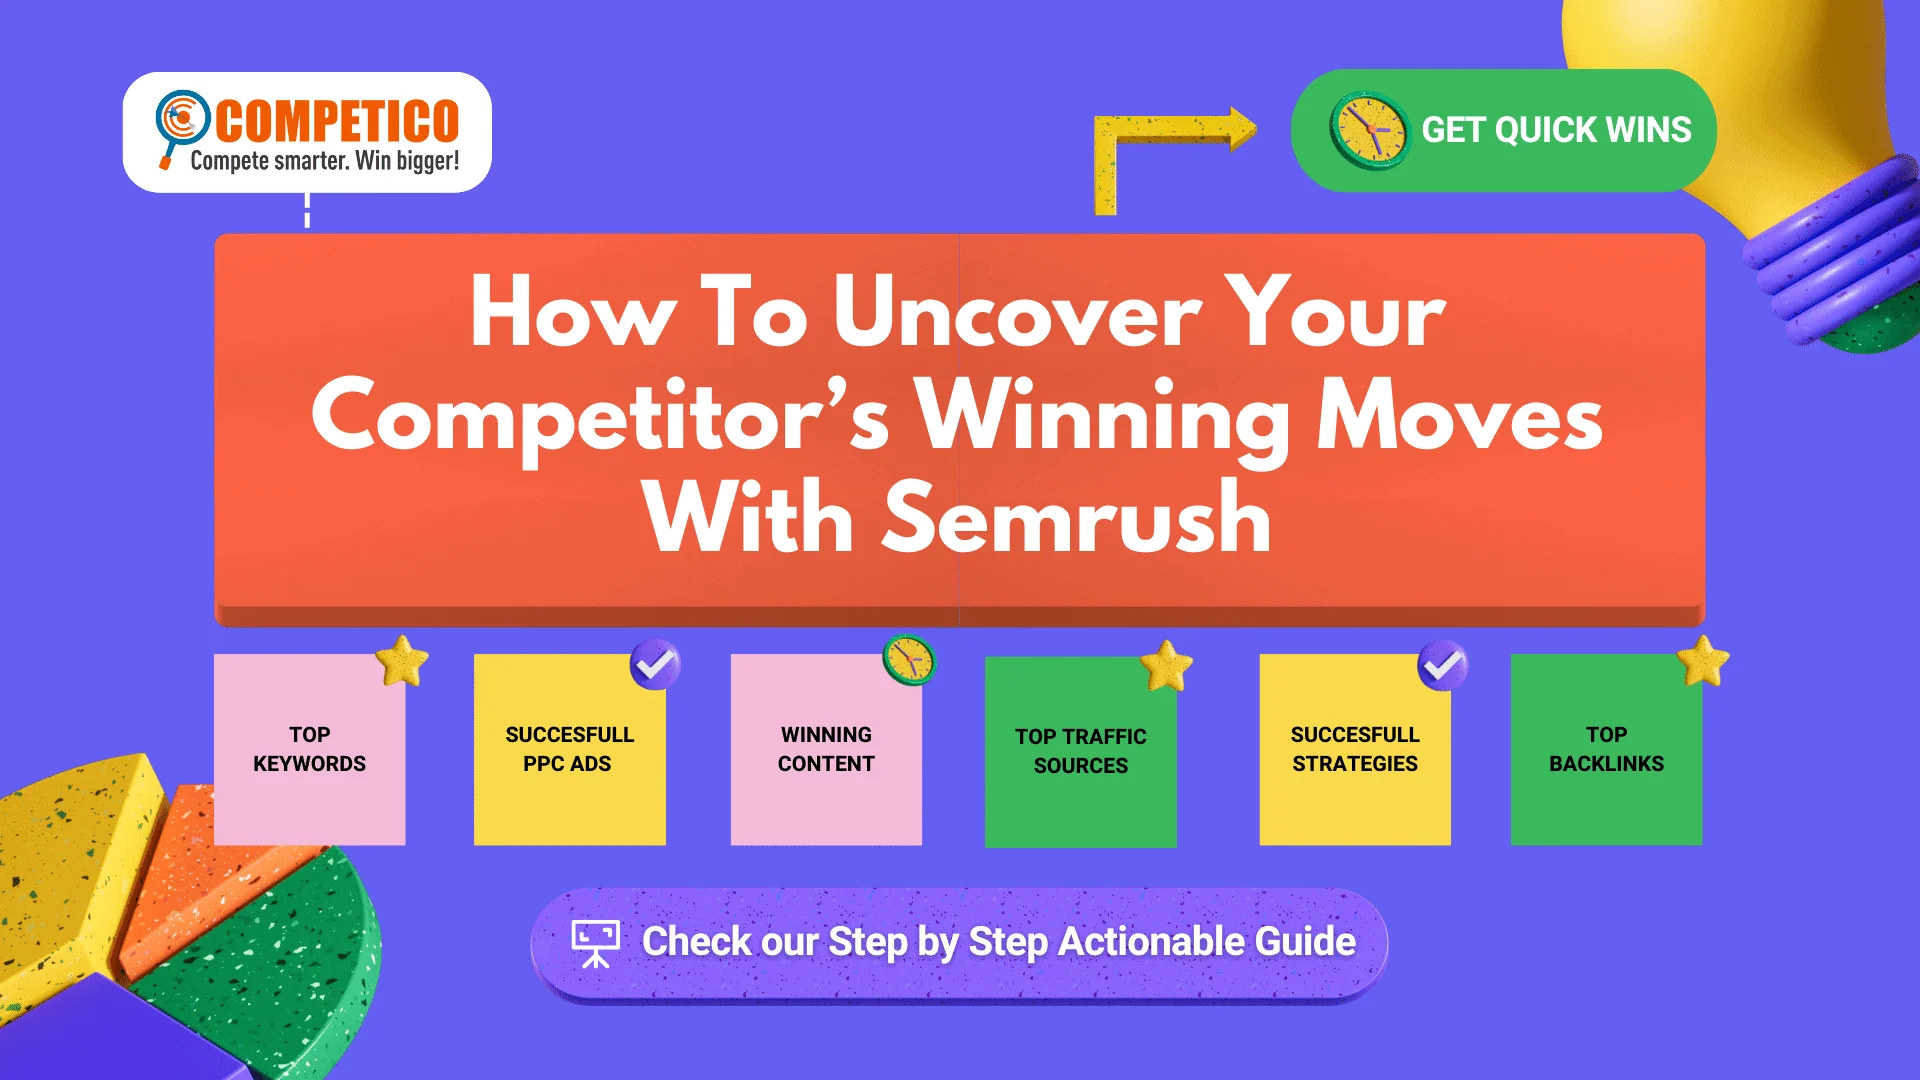 You are currently viewing How To Uncover Your Competitor’s Winning Moves With Semrush